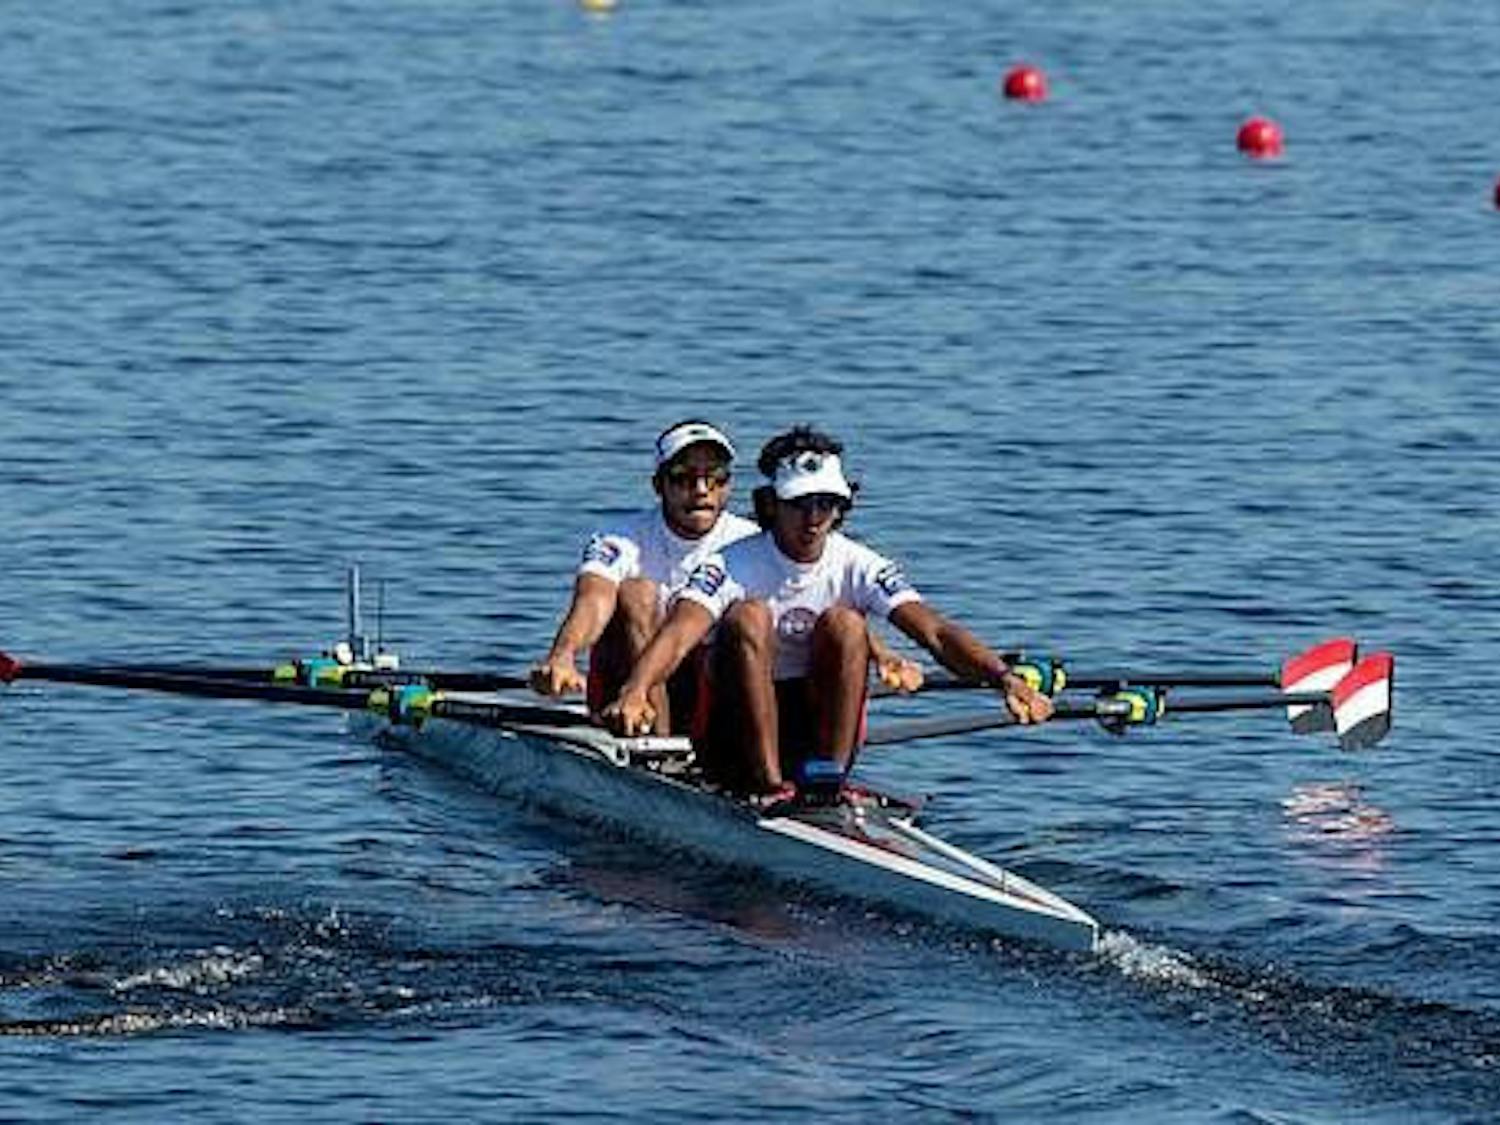 Eldeib (front) and his partner row in the lightweight double race during the 2017 Rowing Championship in Sarasota, Florida.